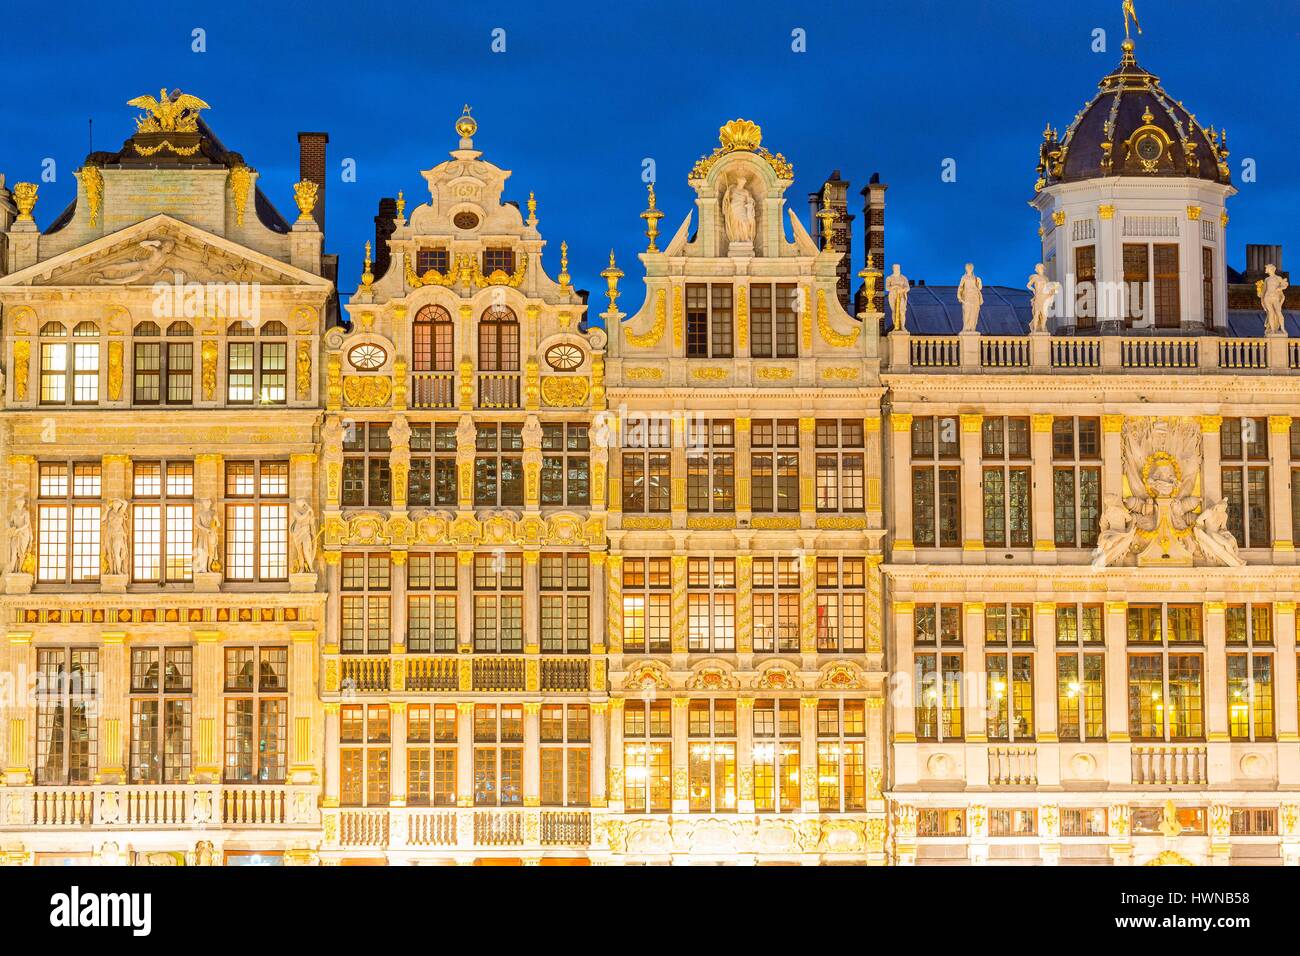 Belgium, Brussels, Grand Place (Grote Markt), listed as World Heritage by UNESCO, houses of the 17th century guilds, from left to right, Maison de la Louve, Maison du Sac, Maison de la Brouette and Maison du Roi d'Espagne Stock Photo